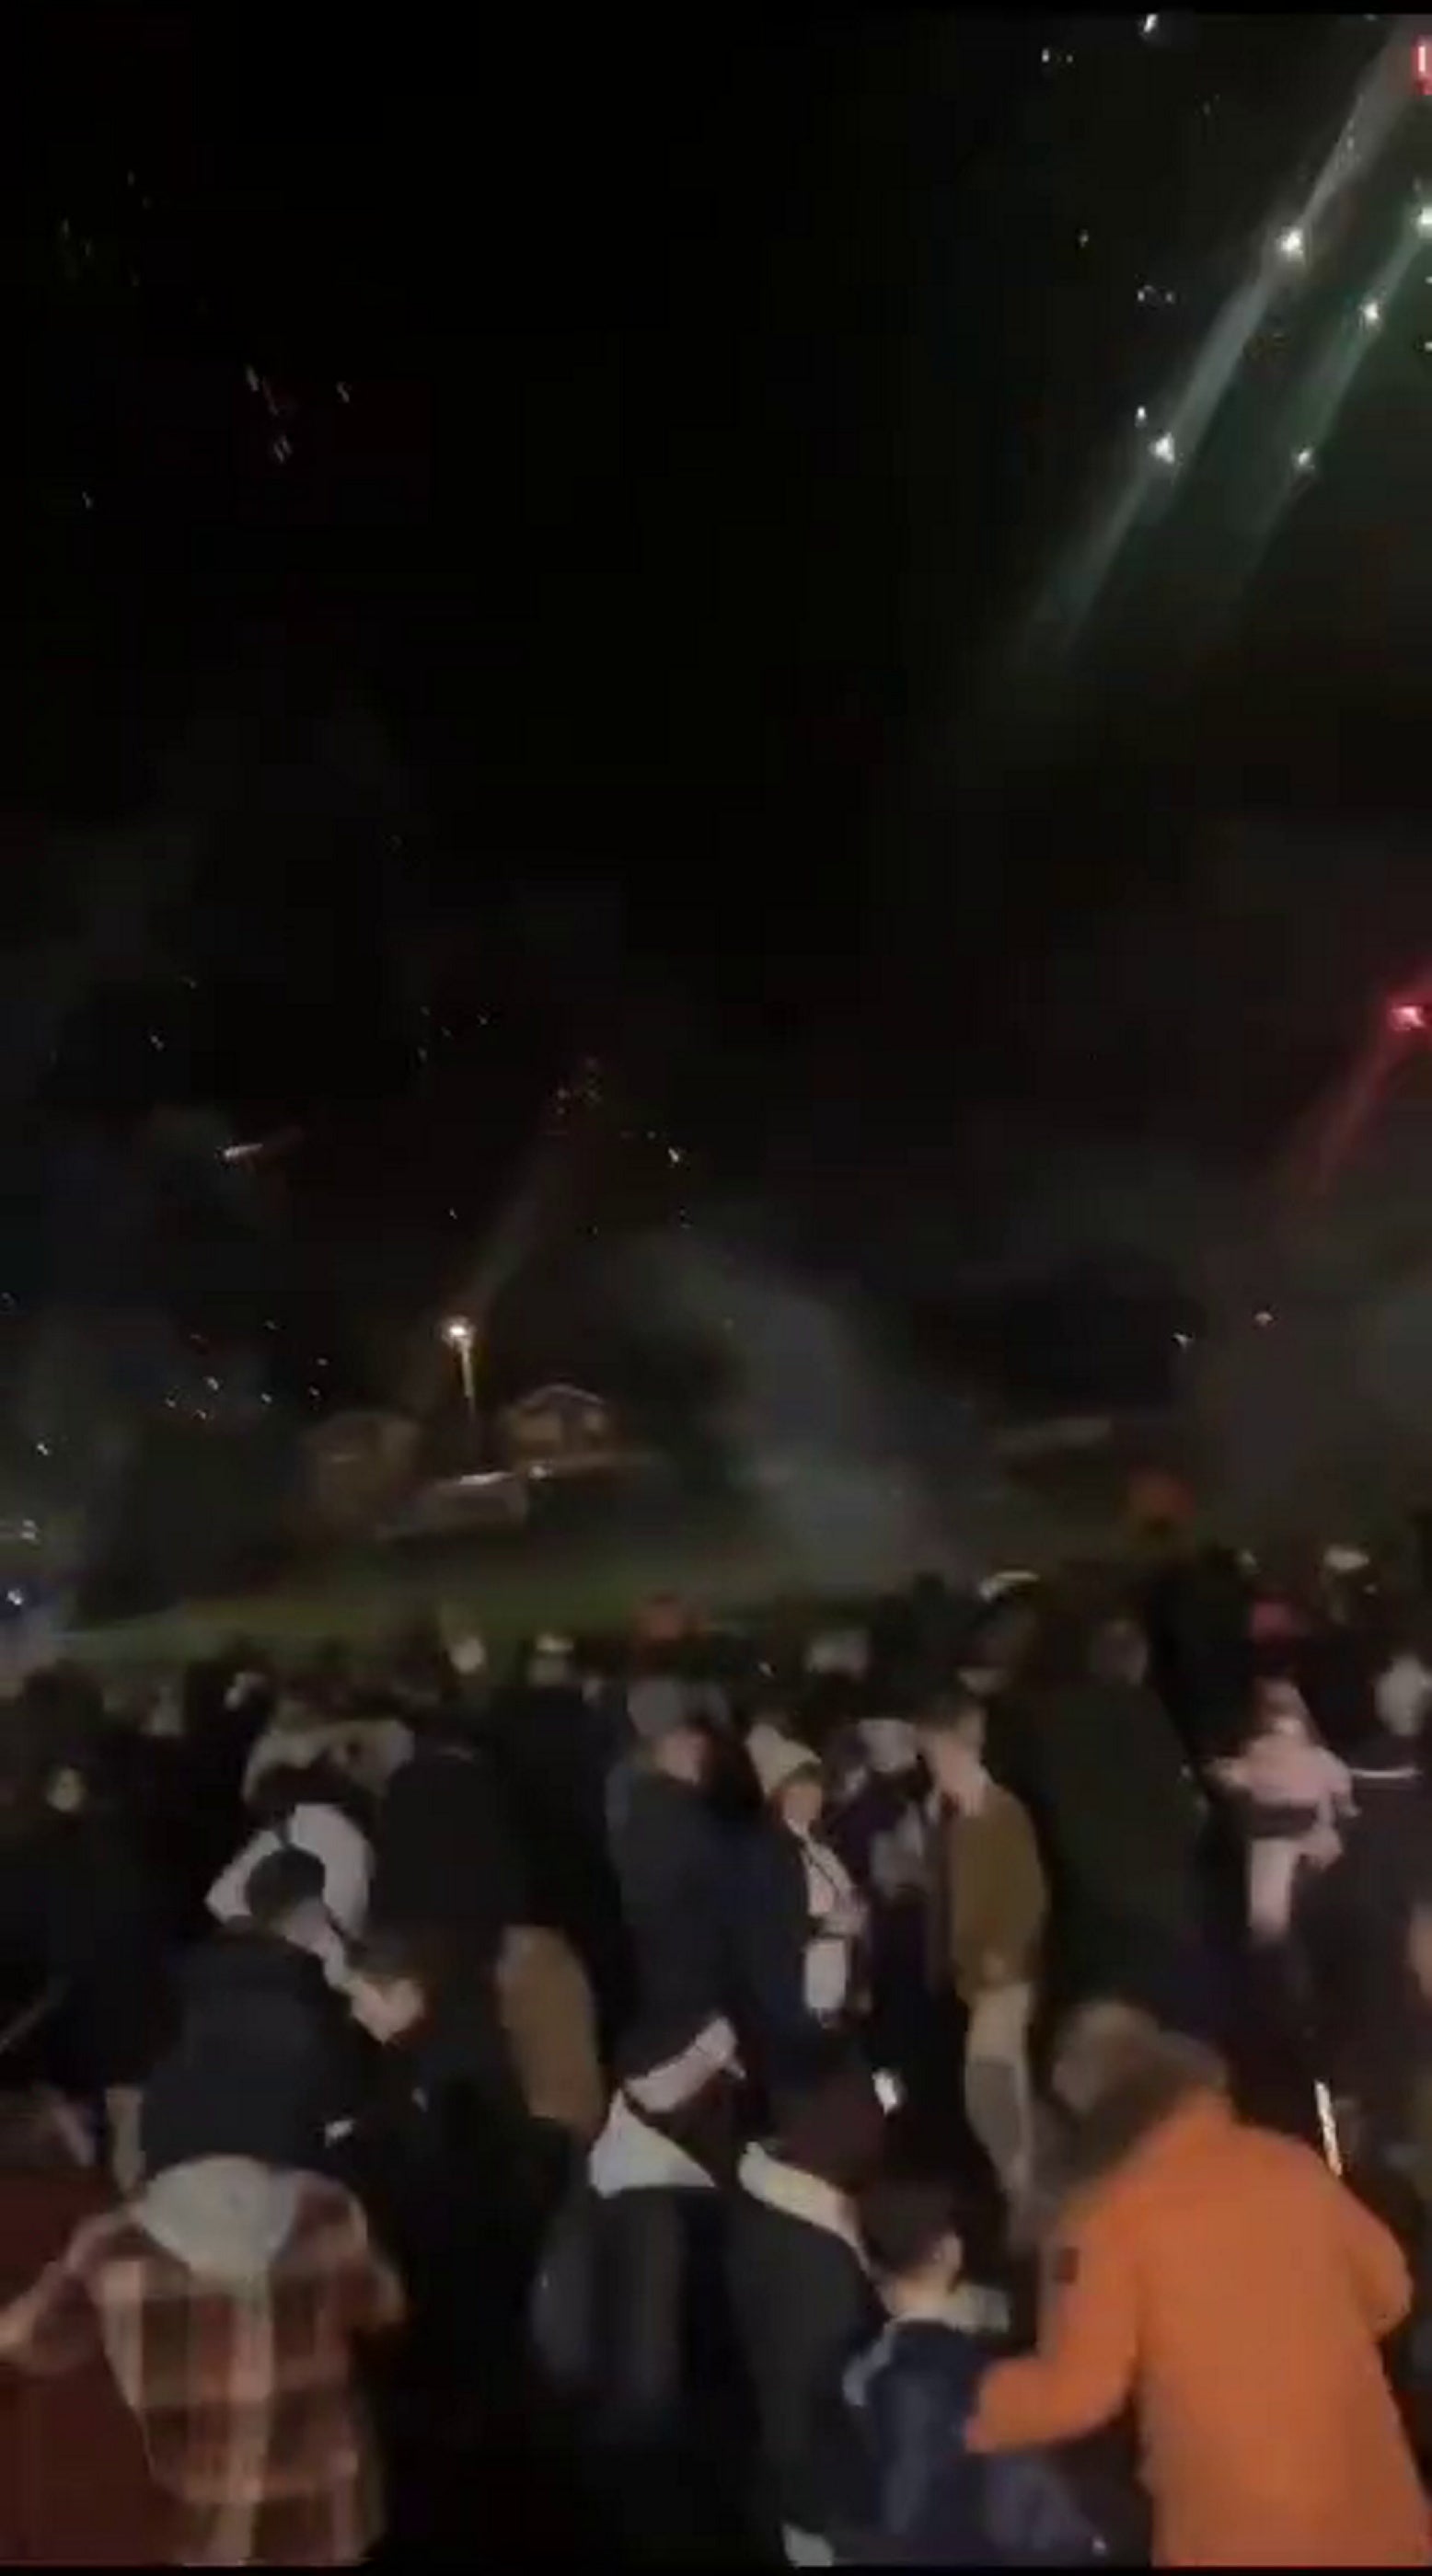 Revellers were head screaming after a firework appeard to explode in crowd